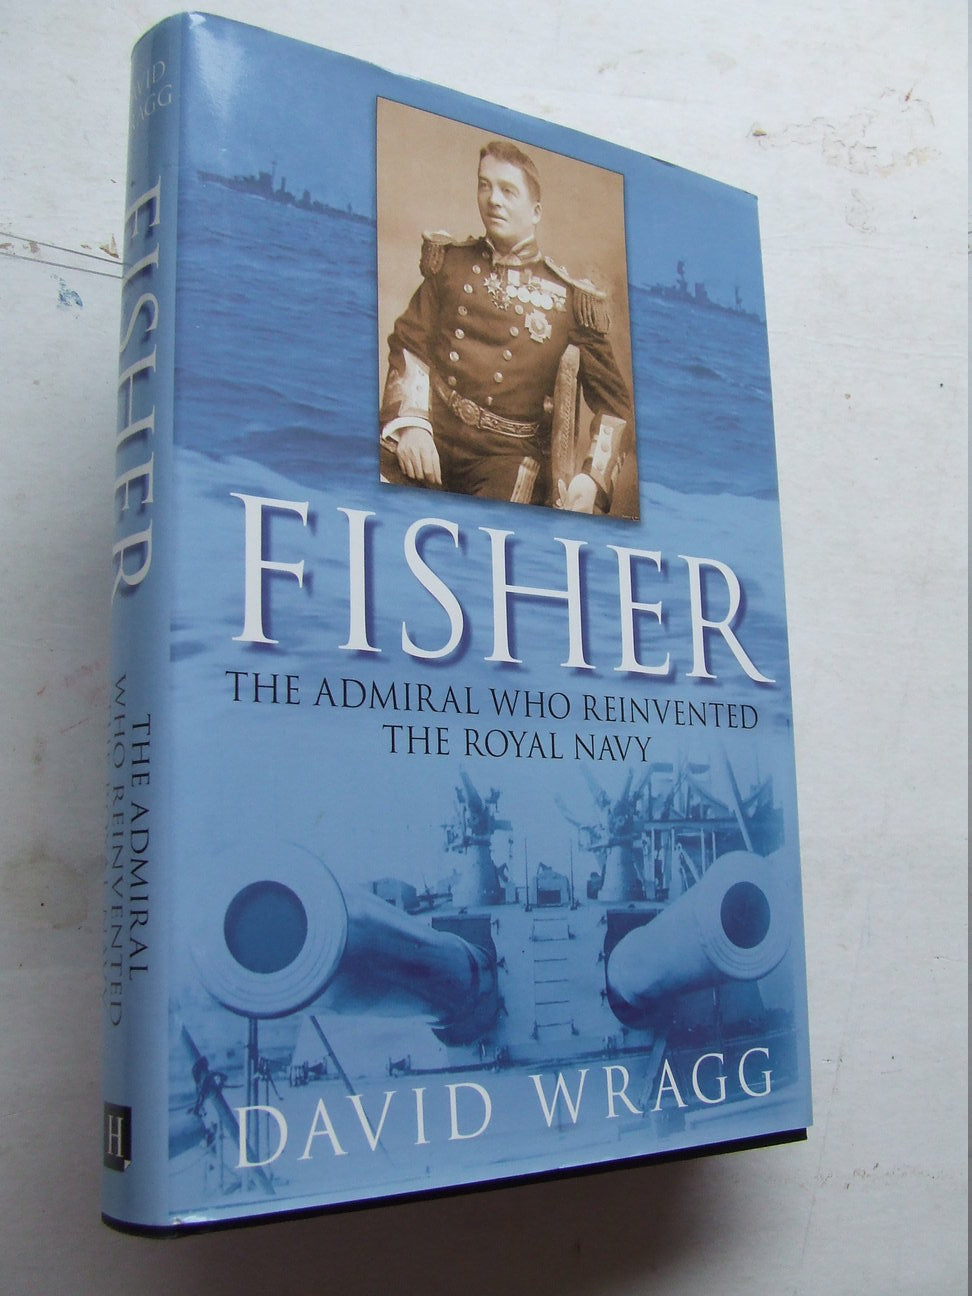 Fisher: the admiral who reinvented the Royal Navy